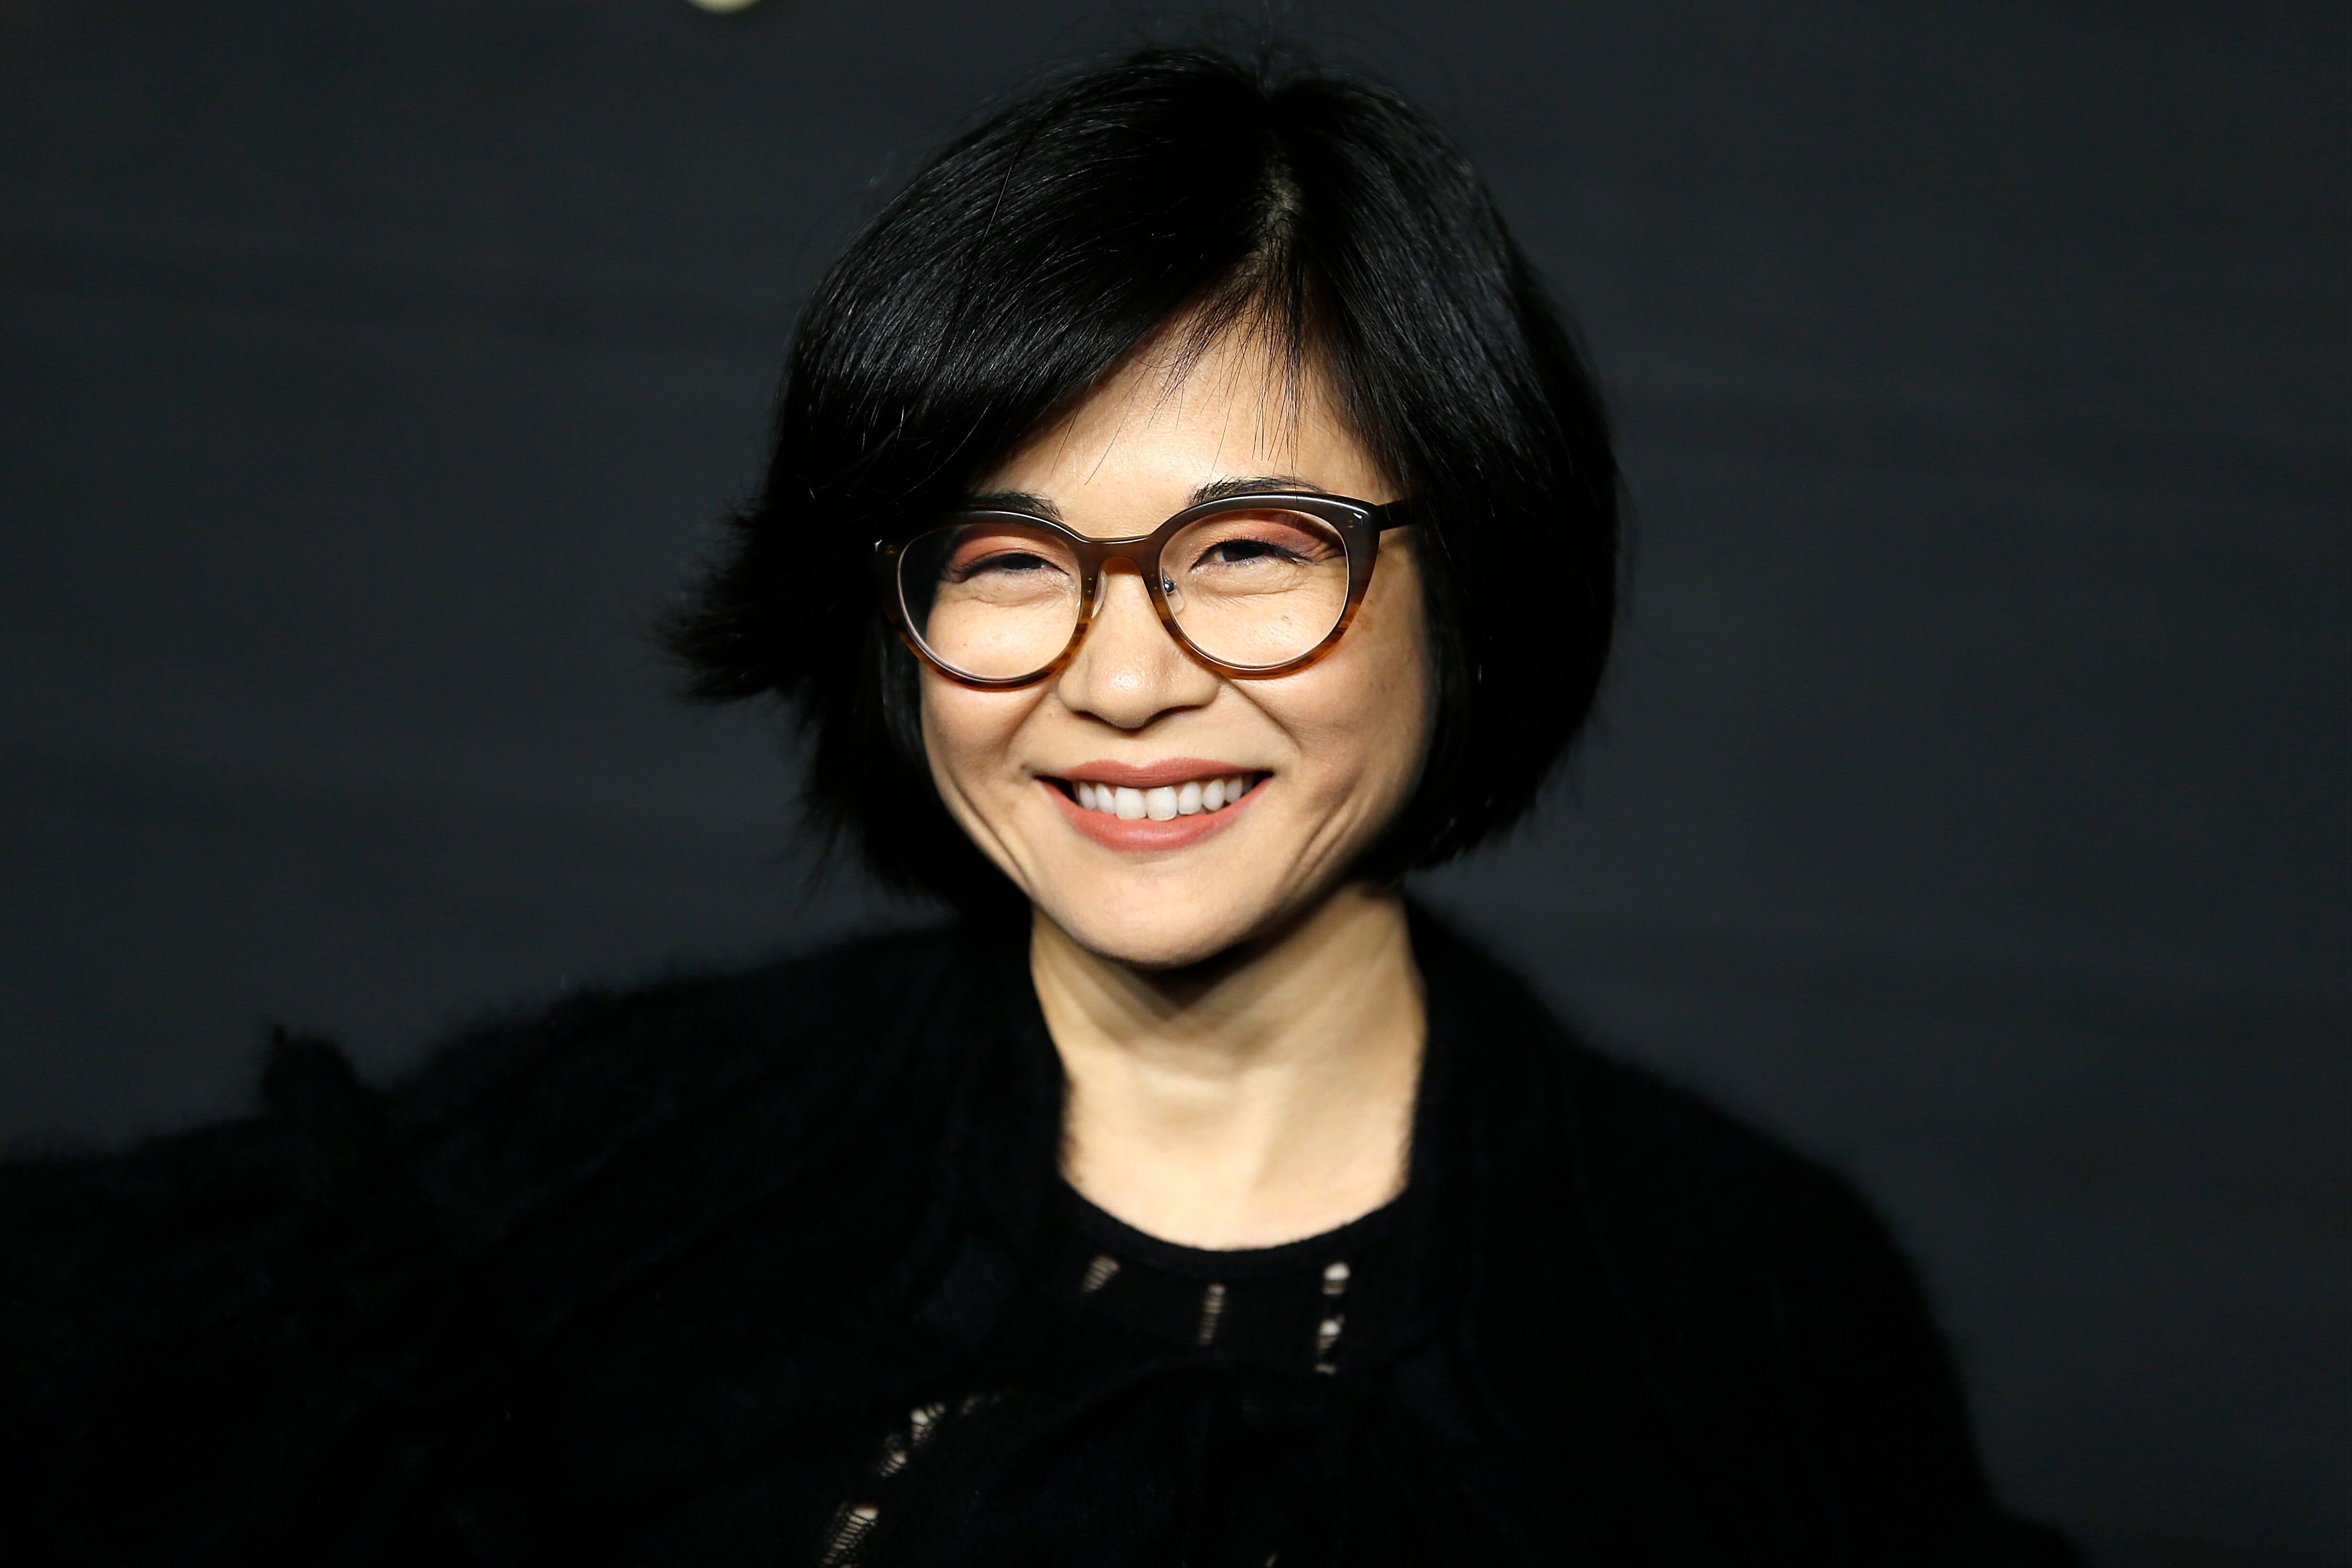 Keiko Agena attends "Dickinson" New York Premiere. | Source: Getty Images